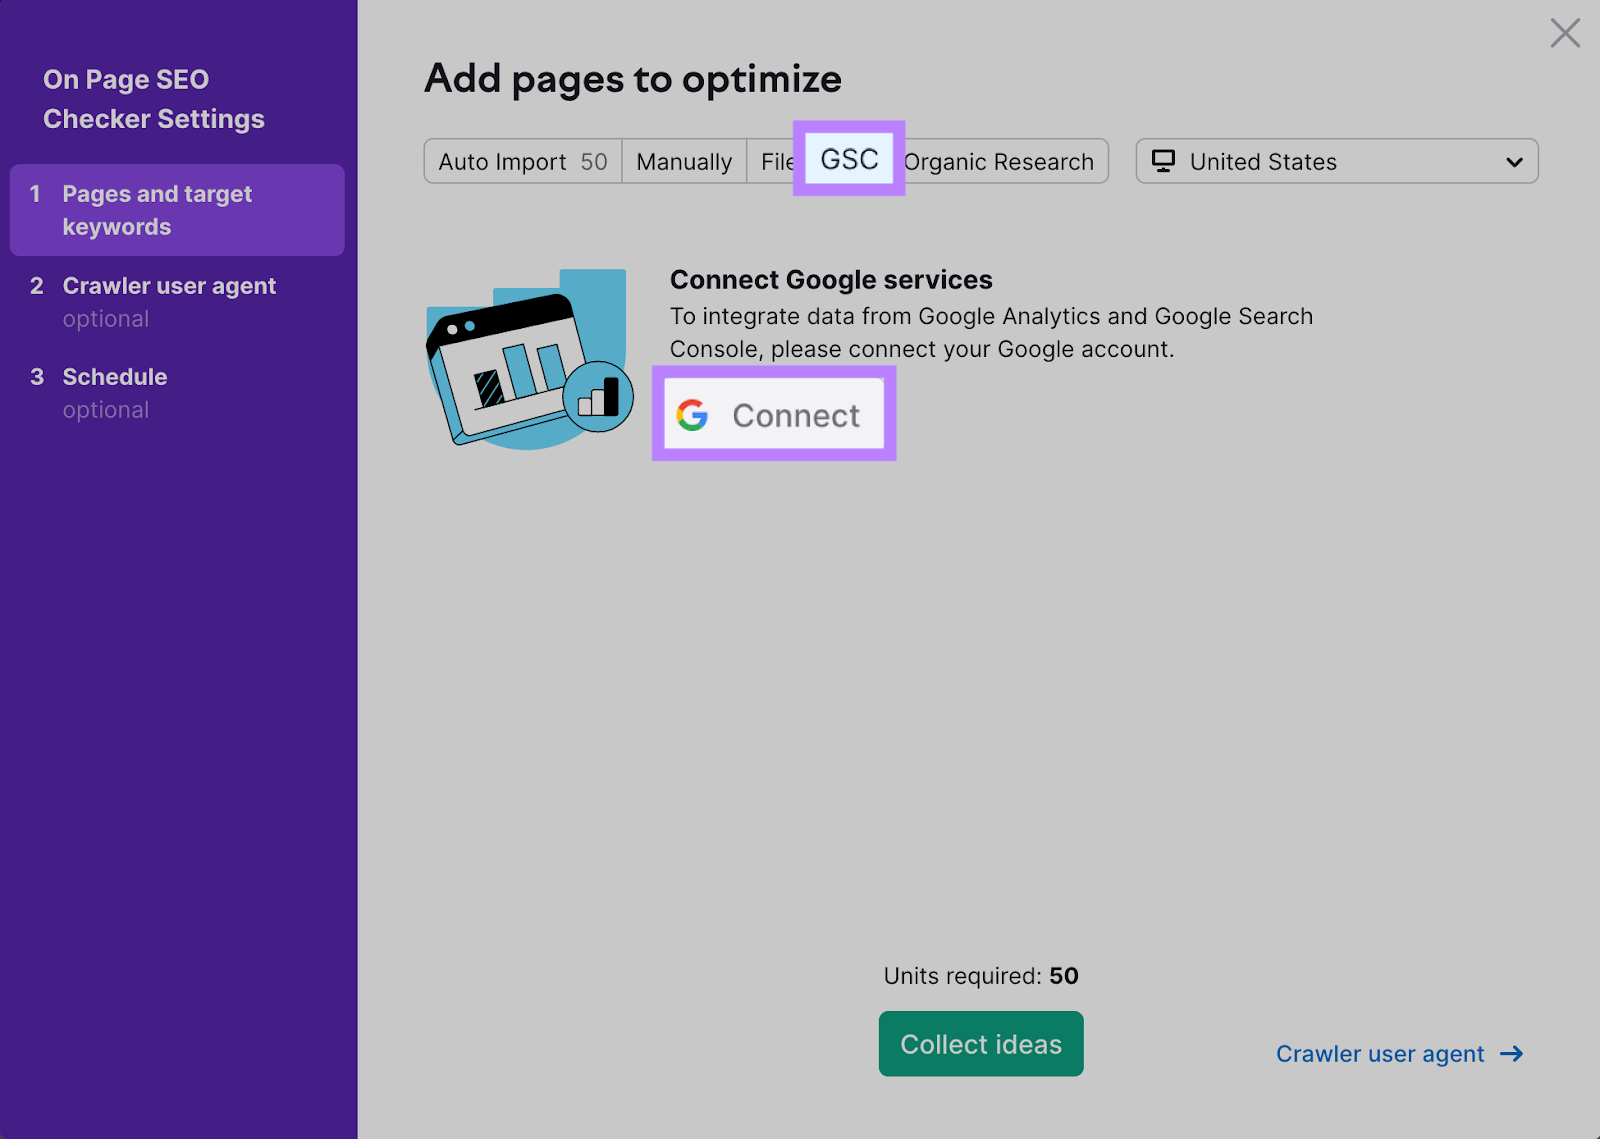 "Add pages to optimize" screen in On Page SEO Checker